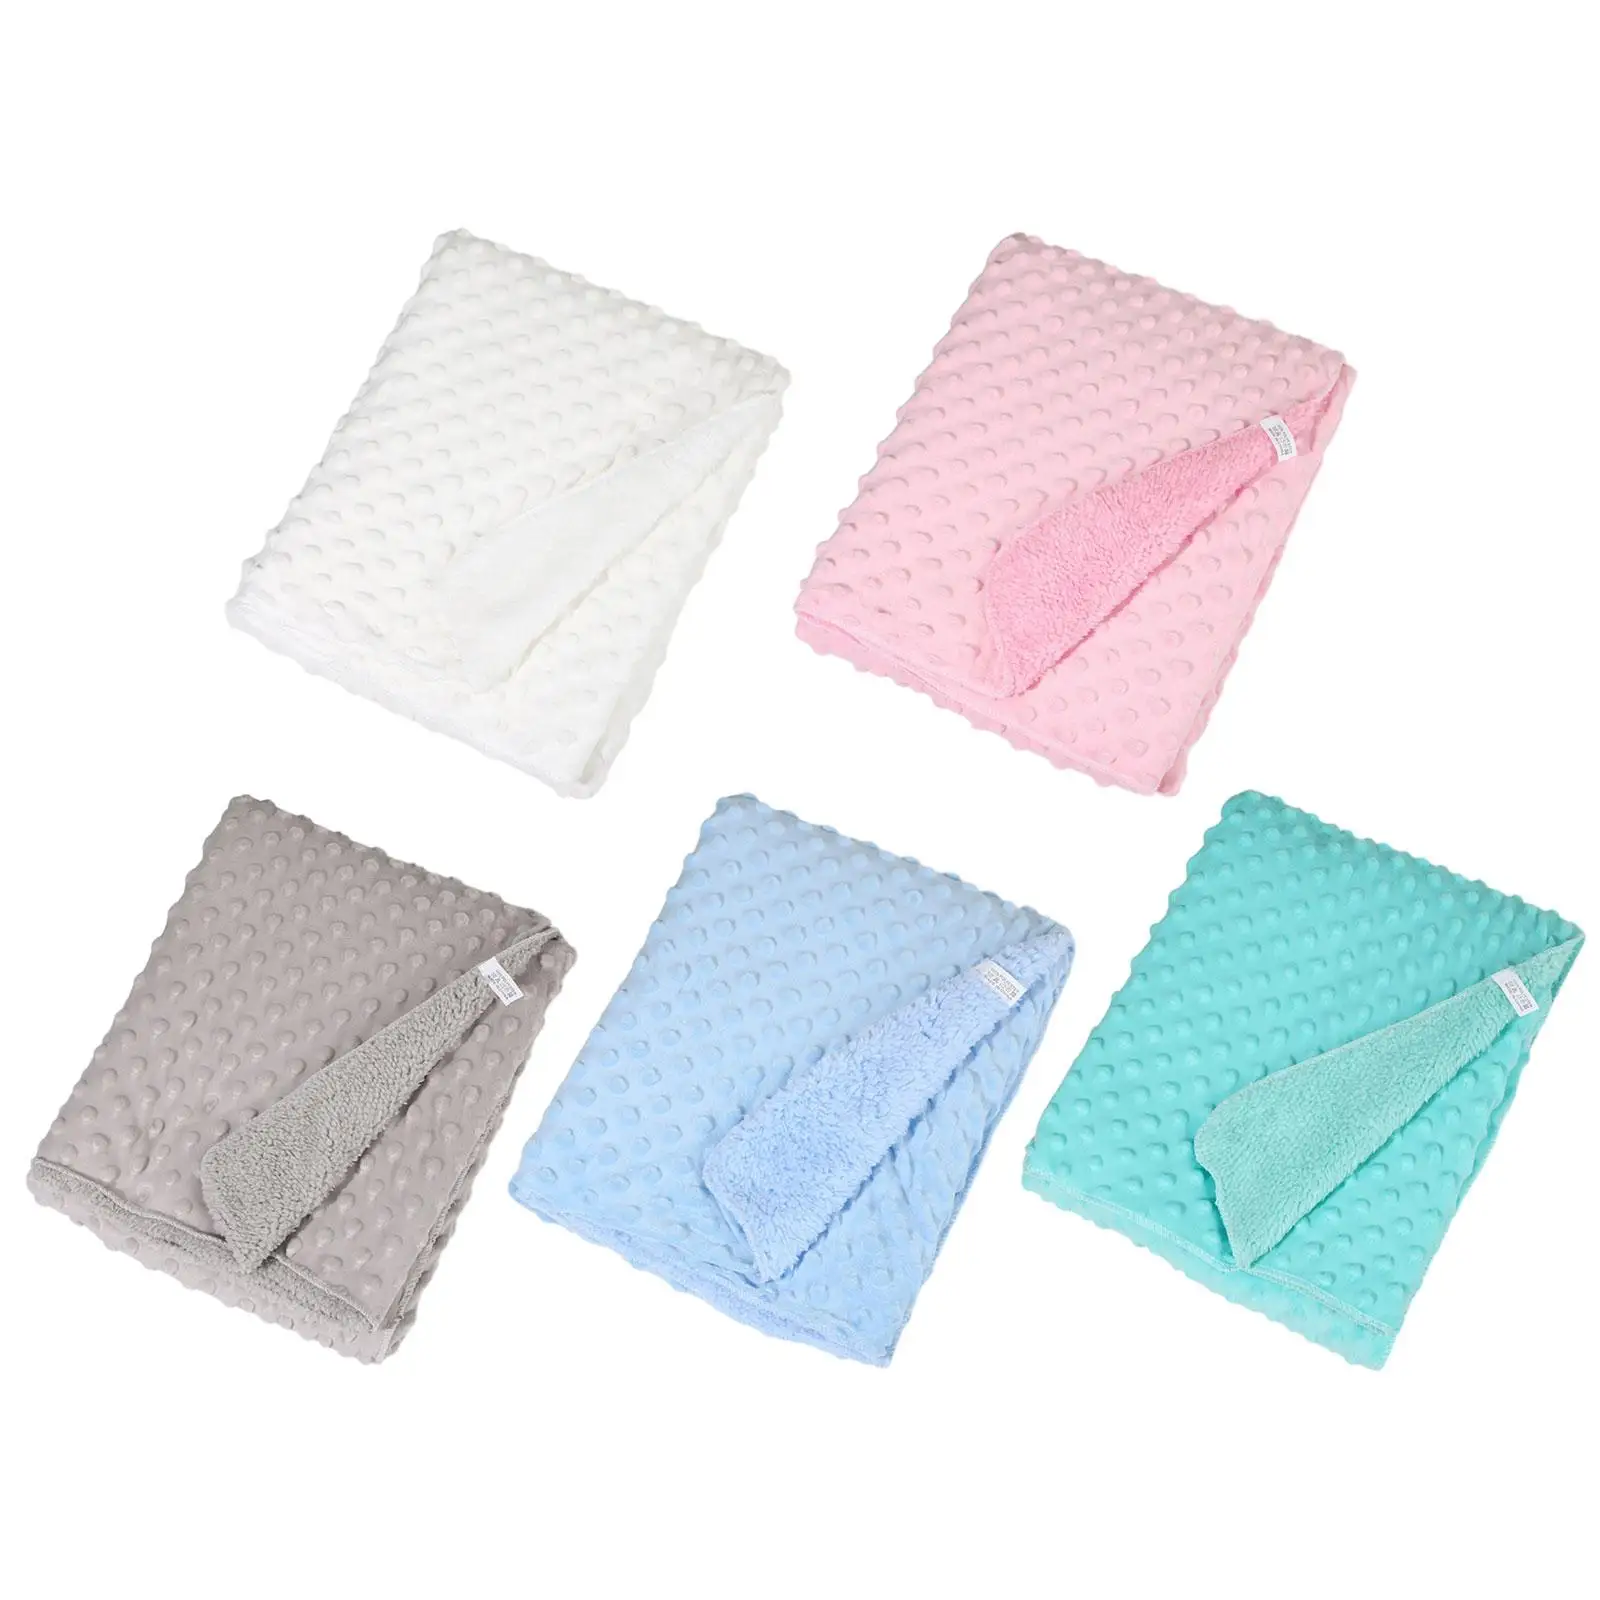 Baby Blanket Warm and Cosy Breathable Super Soft 30x40 Inches Lightweight Newborn Blanket for Nursery Bed Crib Sofa Couch Travel